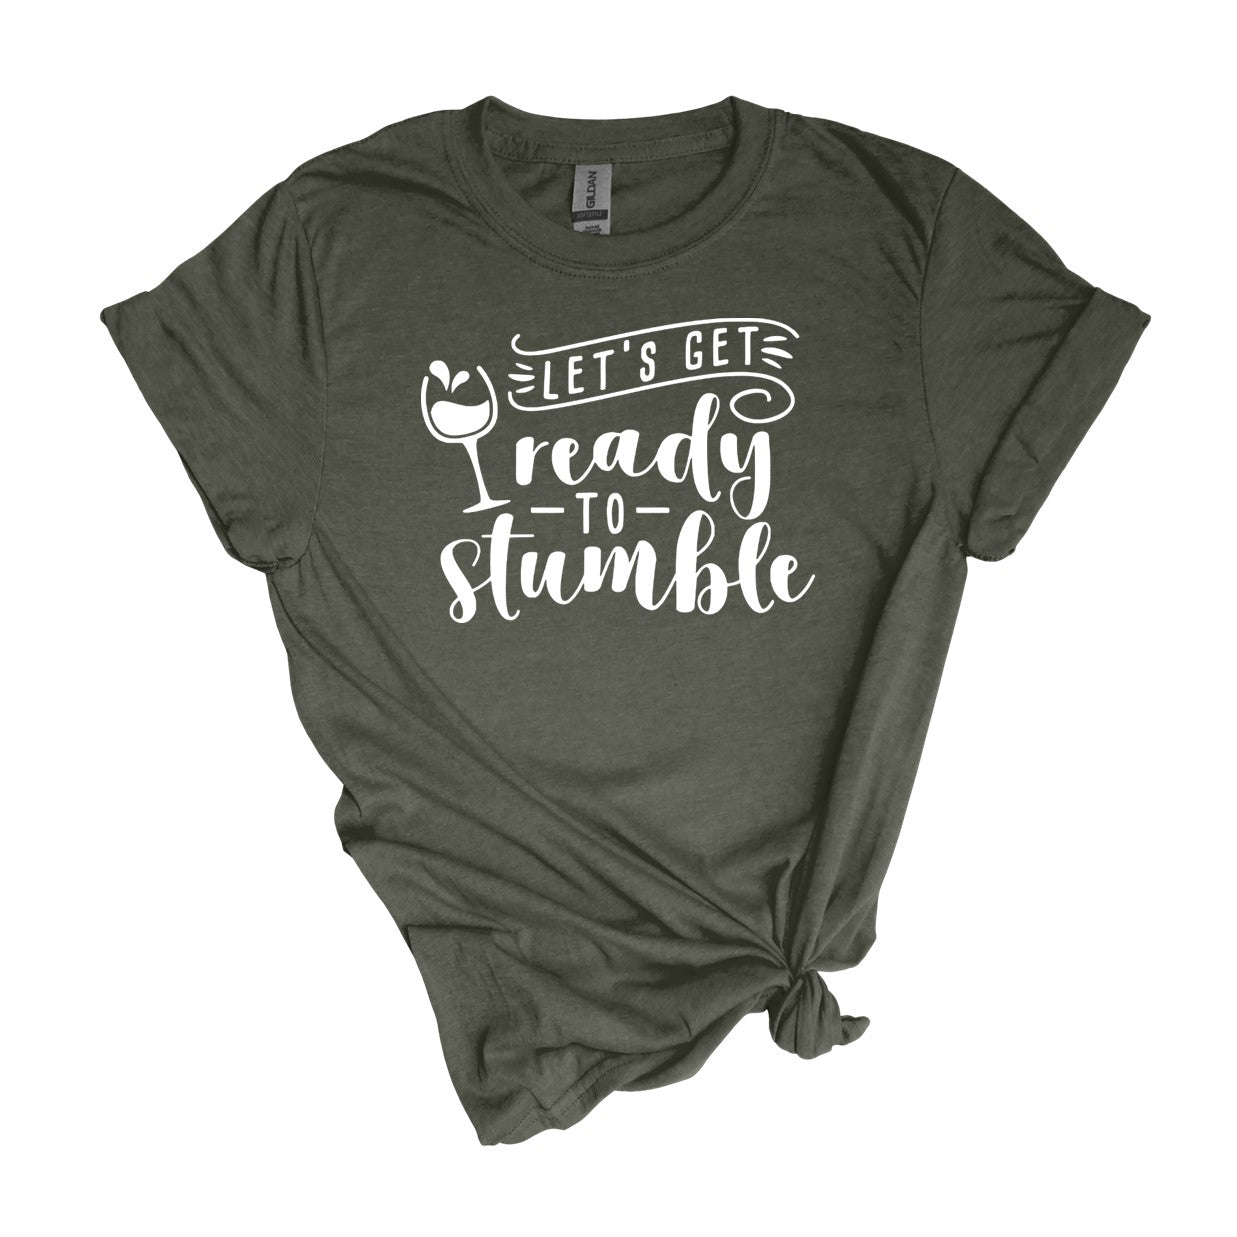 Let's get ready to STUMBLE -Funny Wine Drinking Shirt